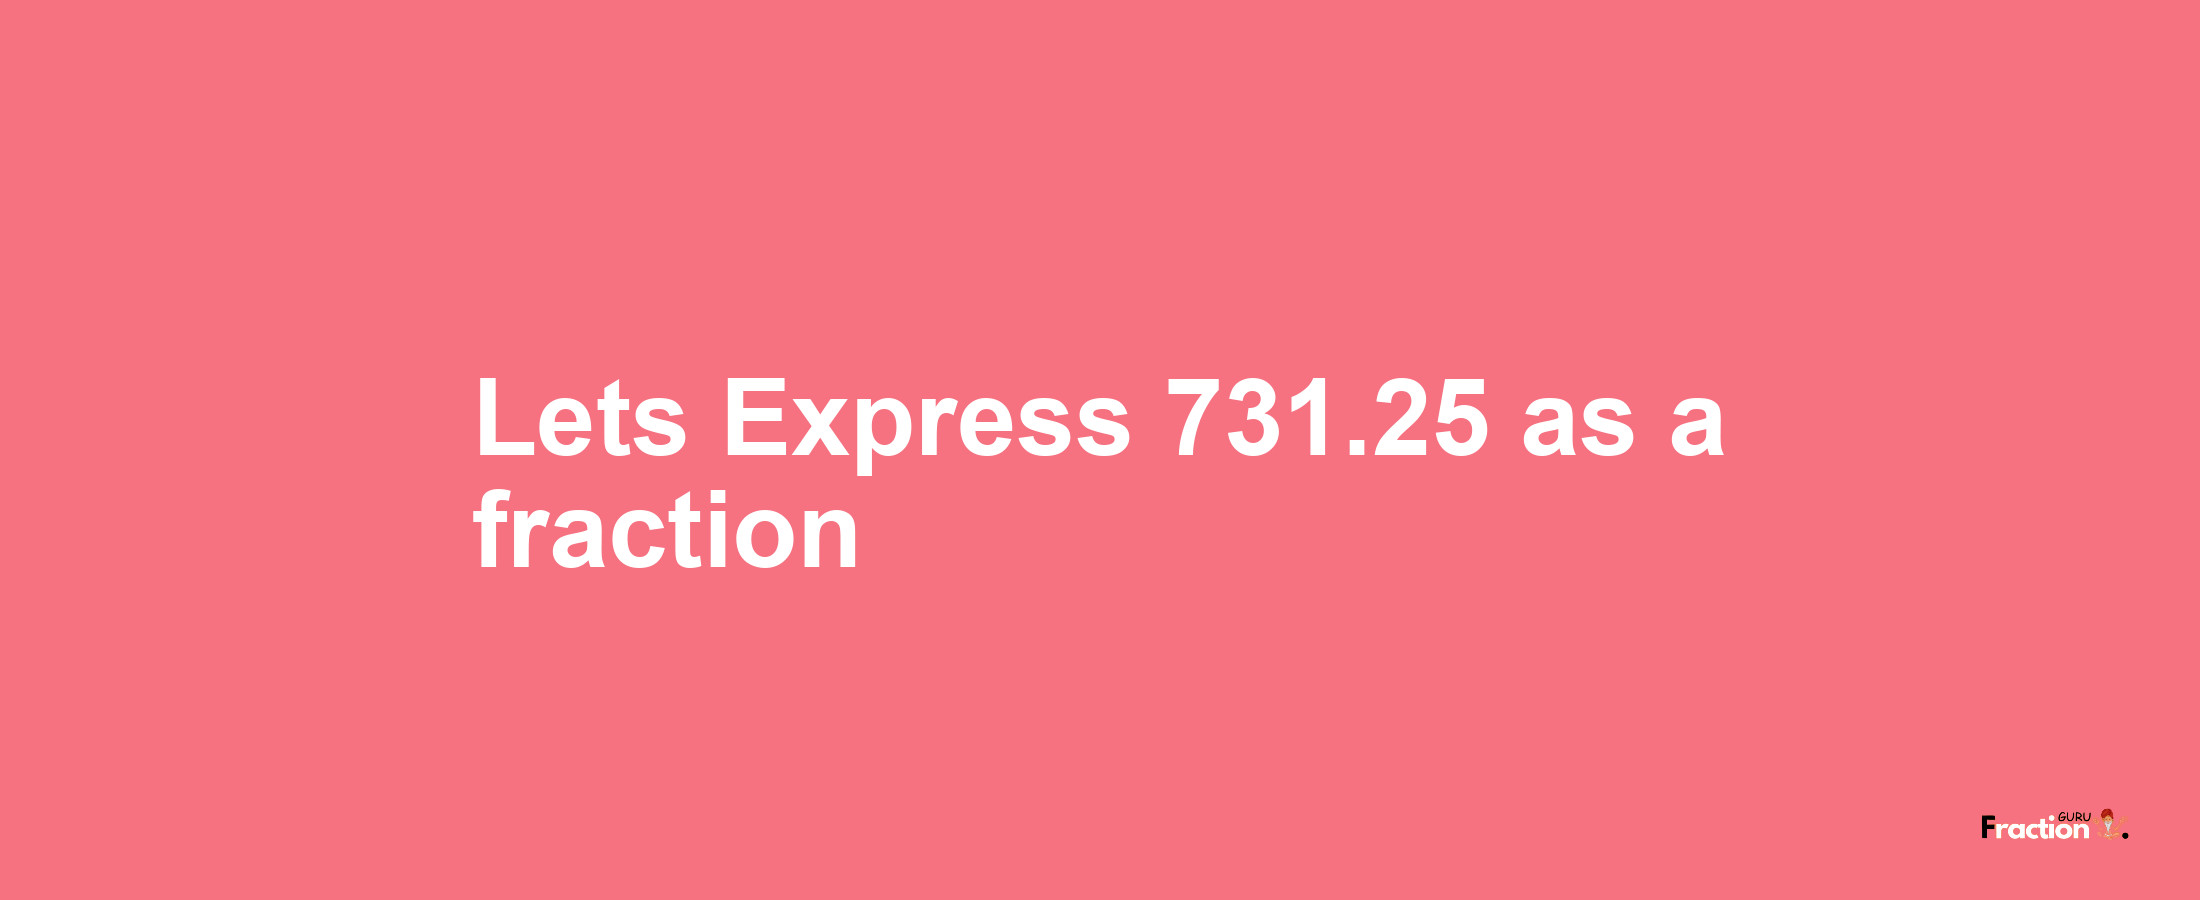 Lets Express 731.25 as afraction